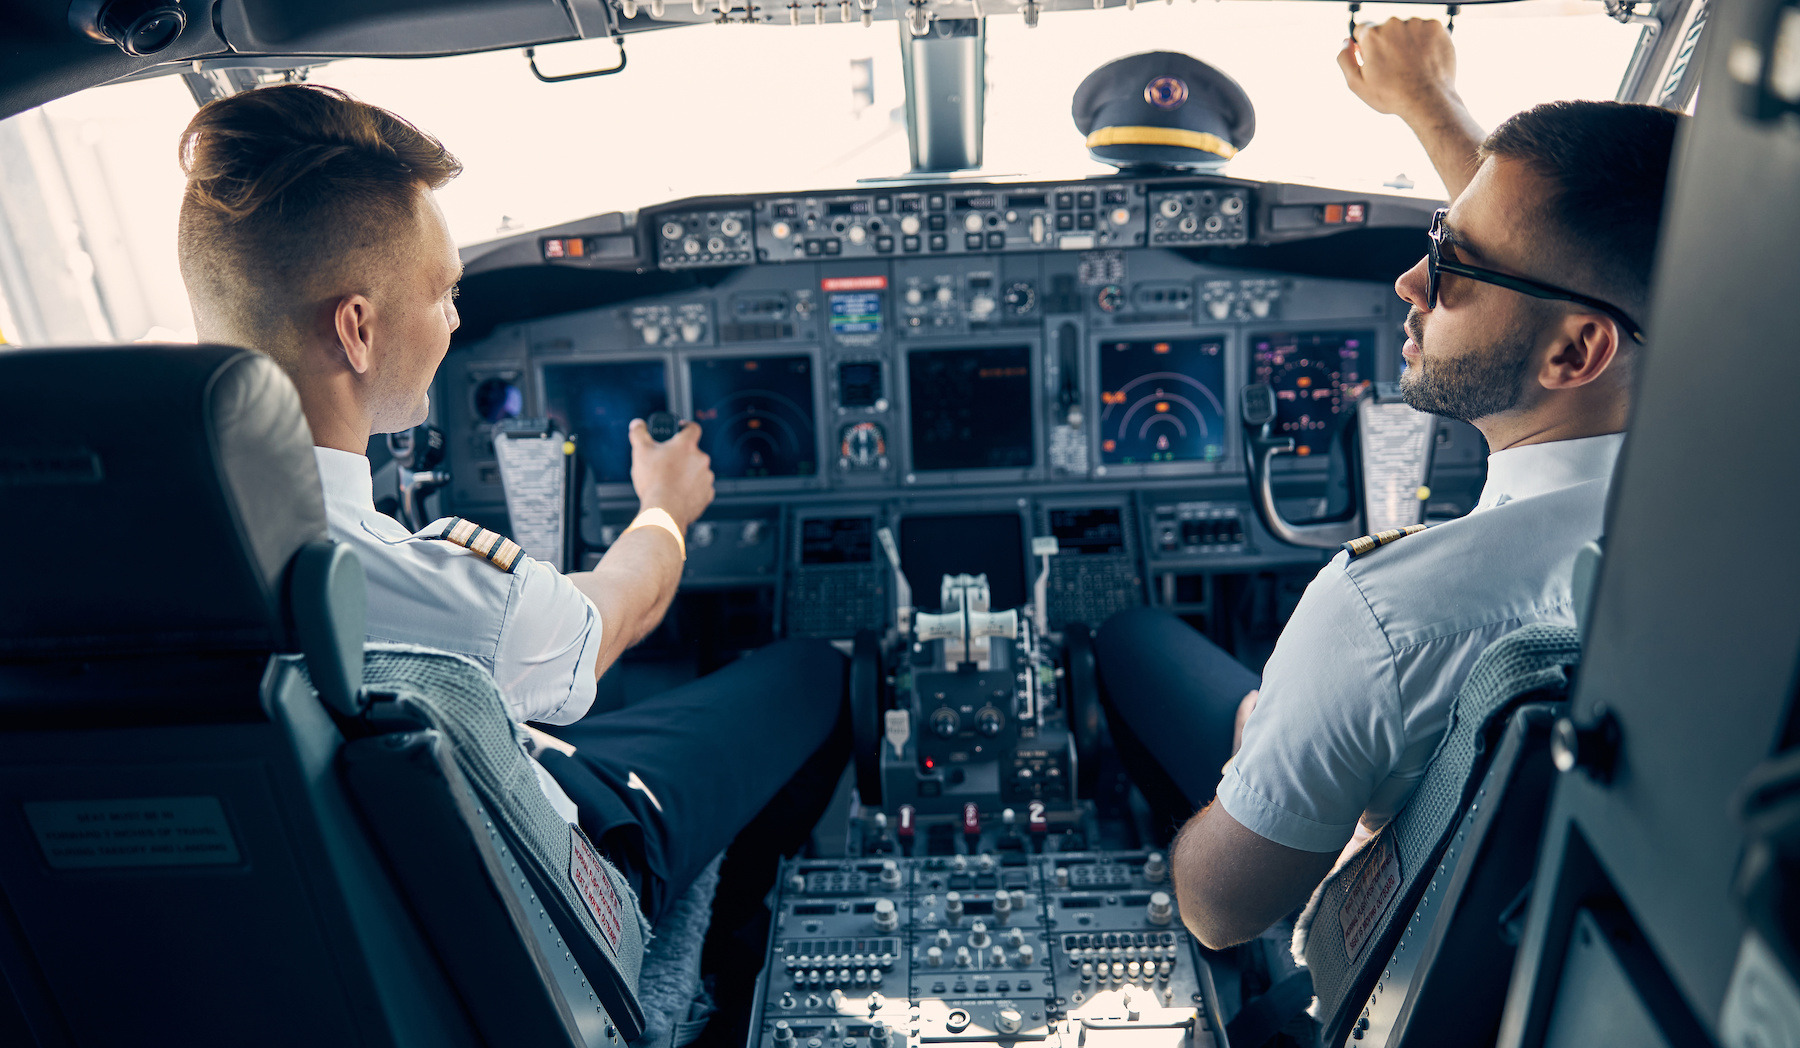 Two male pilots sitting in an airplane cockpit